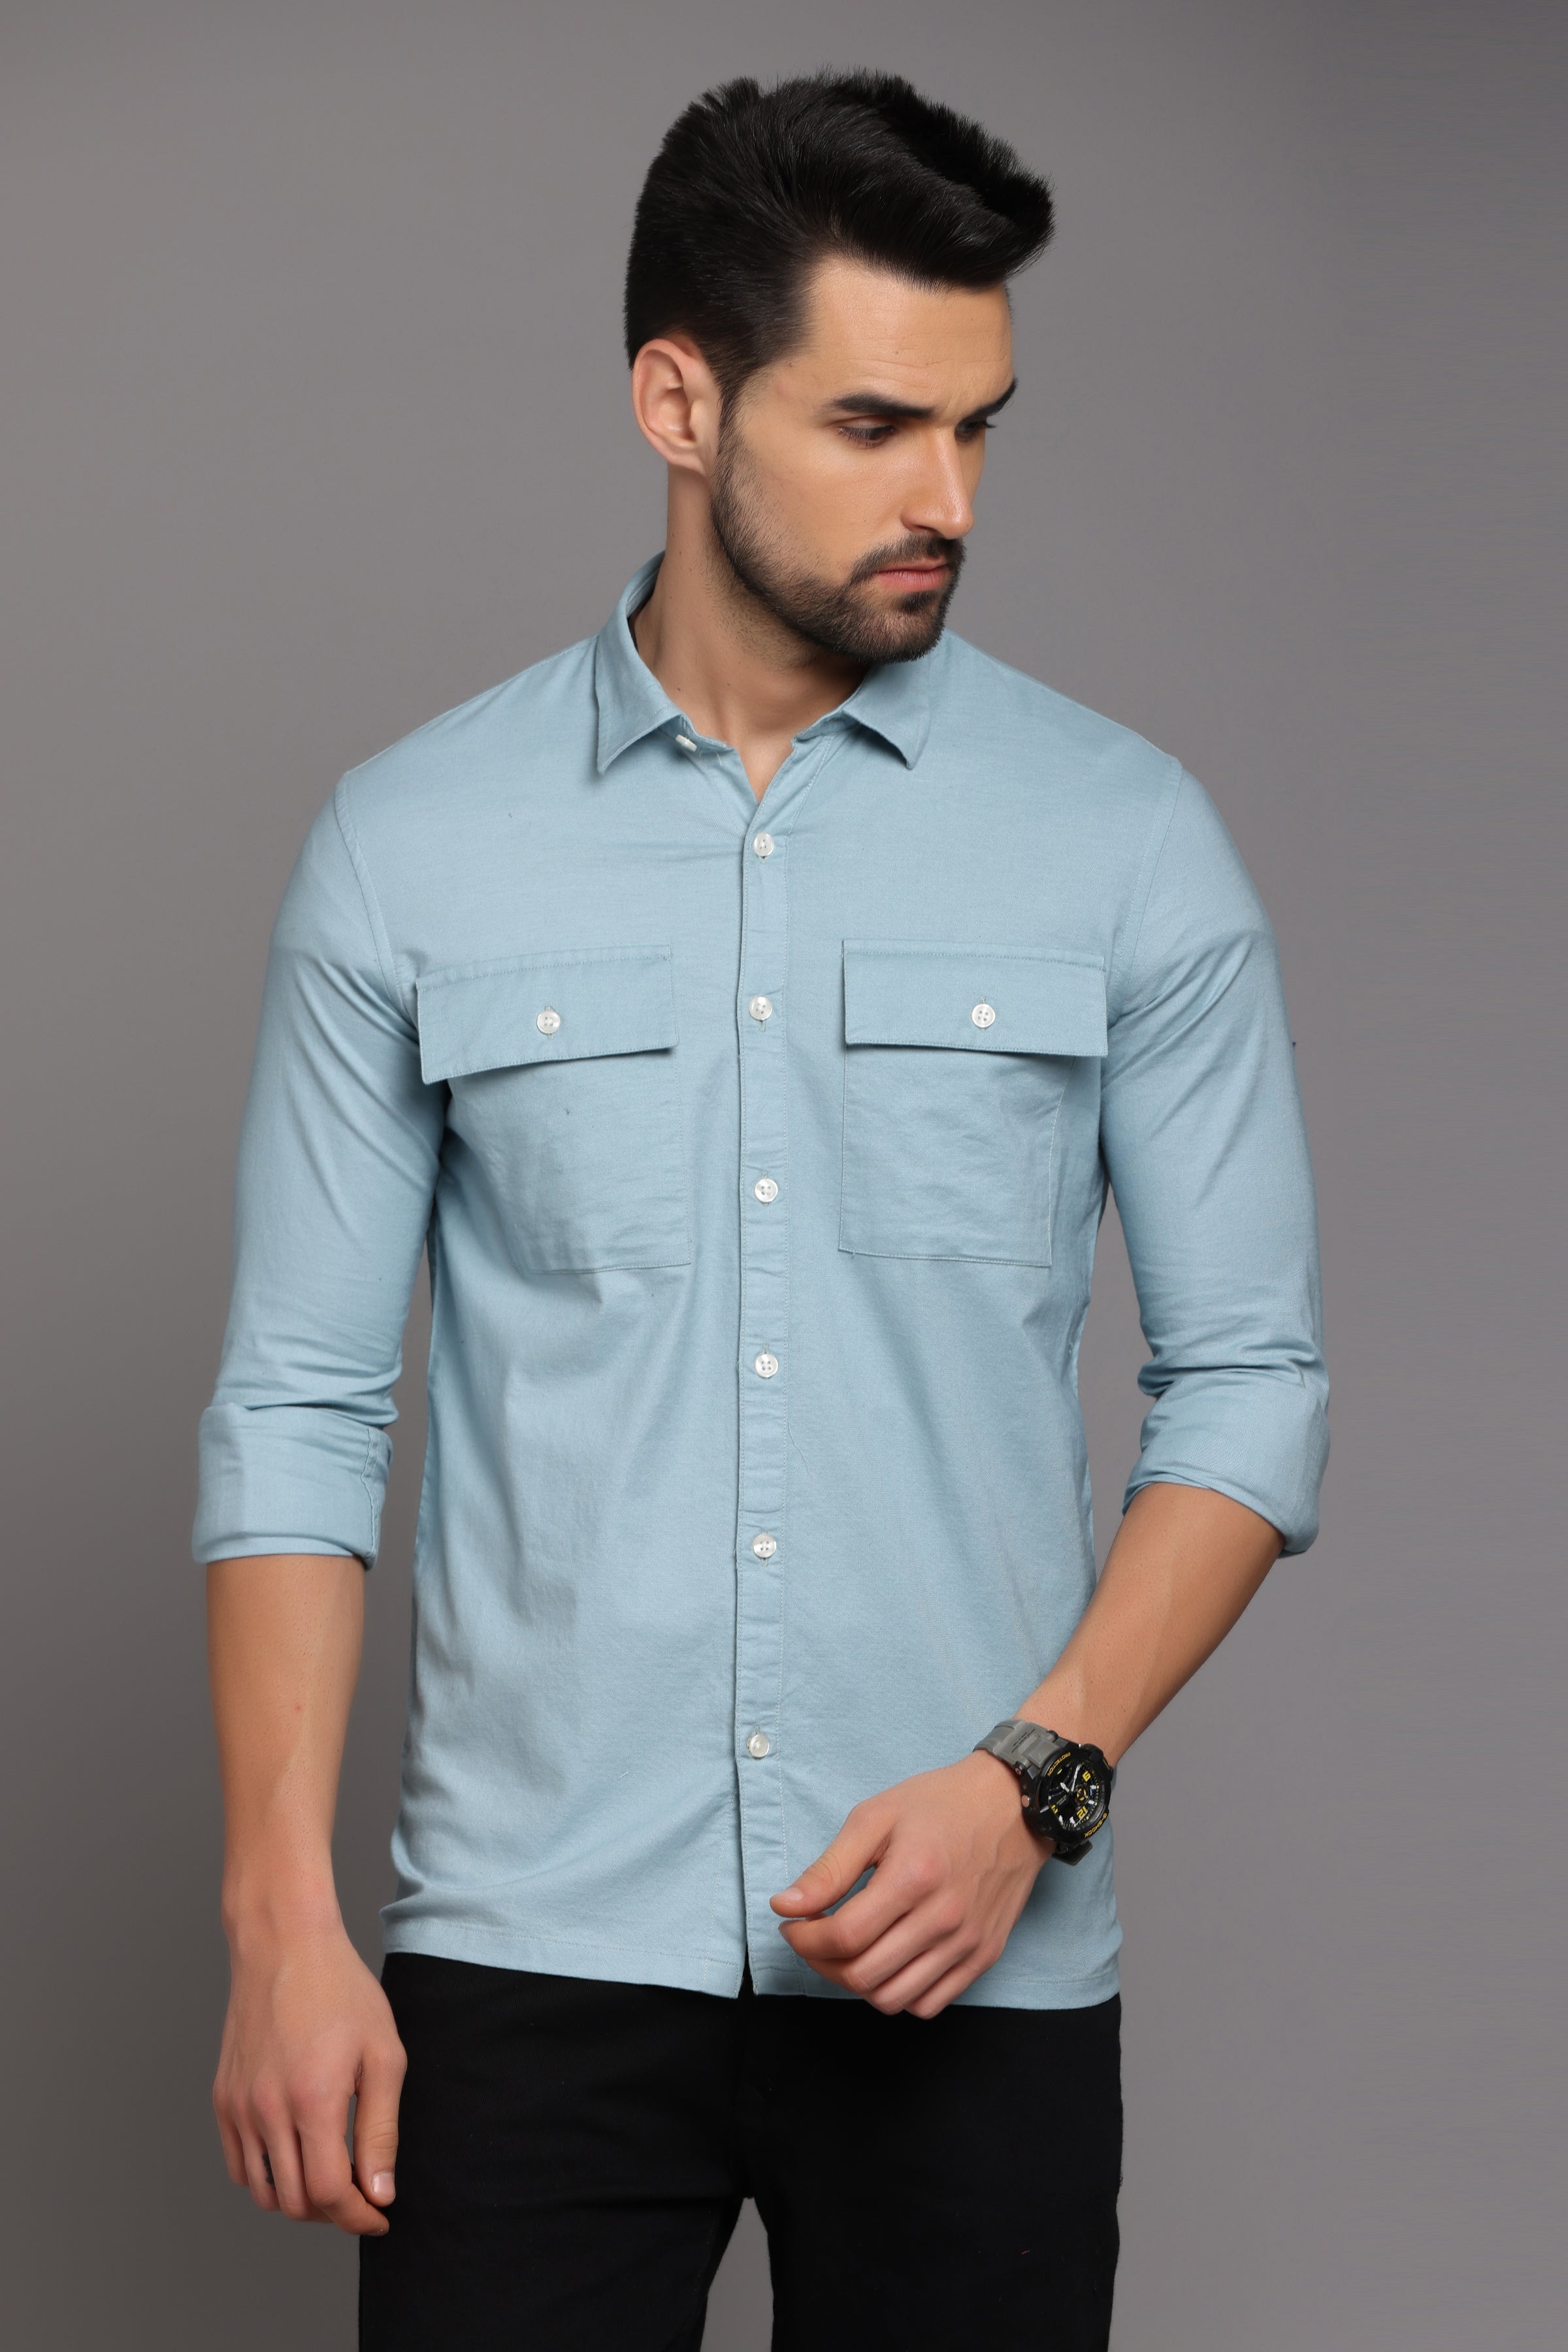 Beau Blue Full Sleeve Shirt with Double Pocket Shirts Project 30 S 